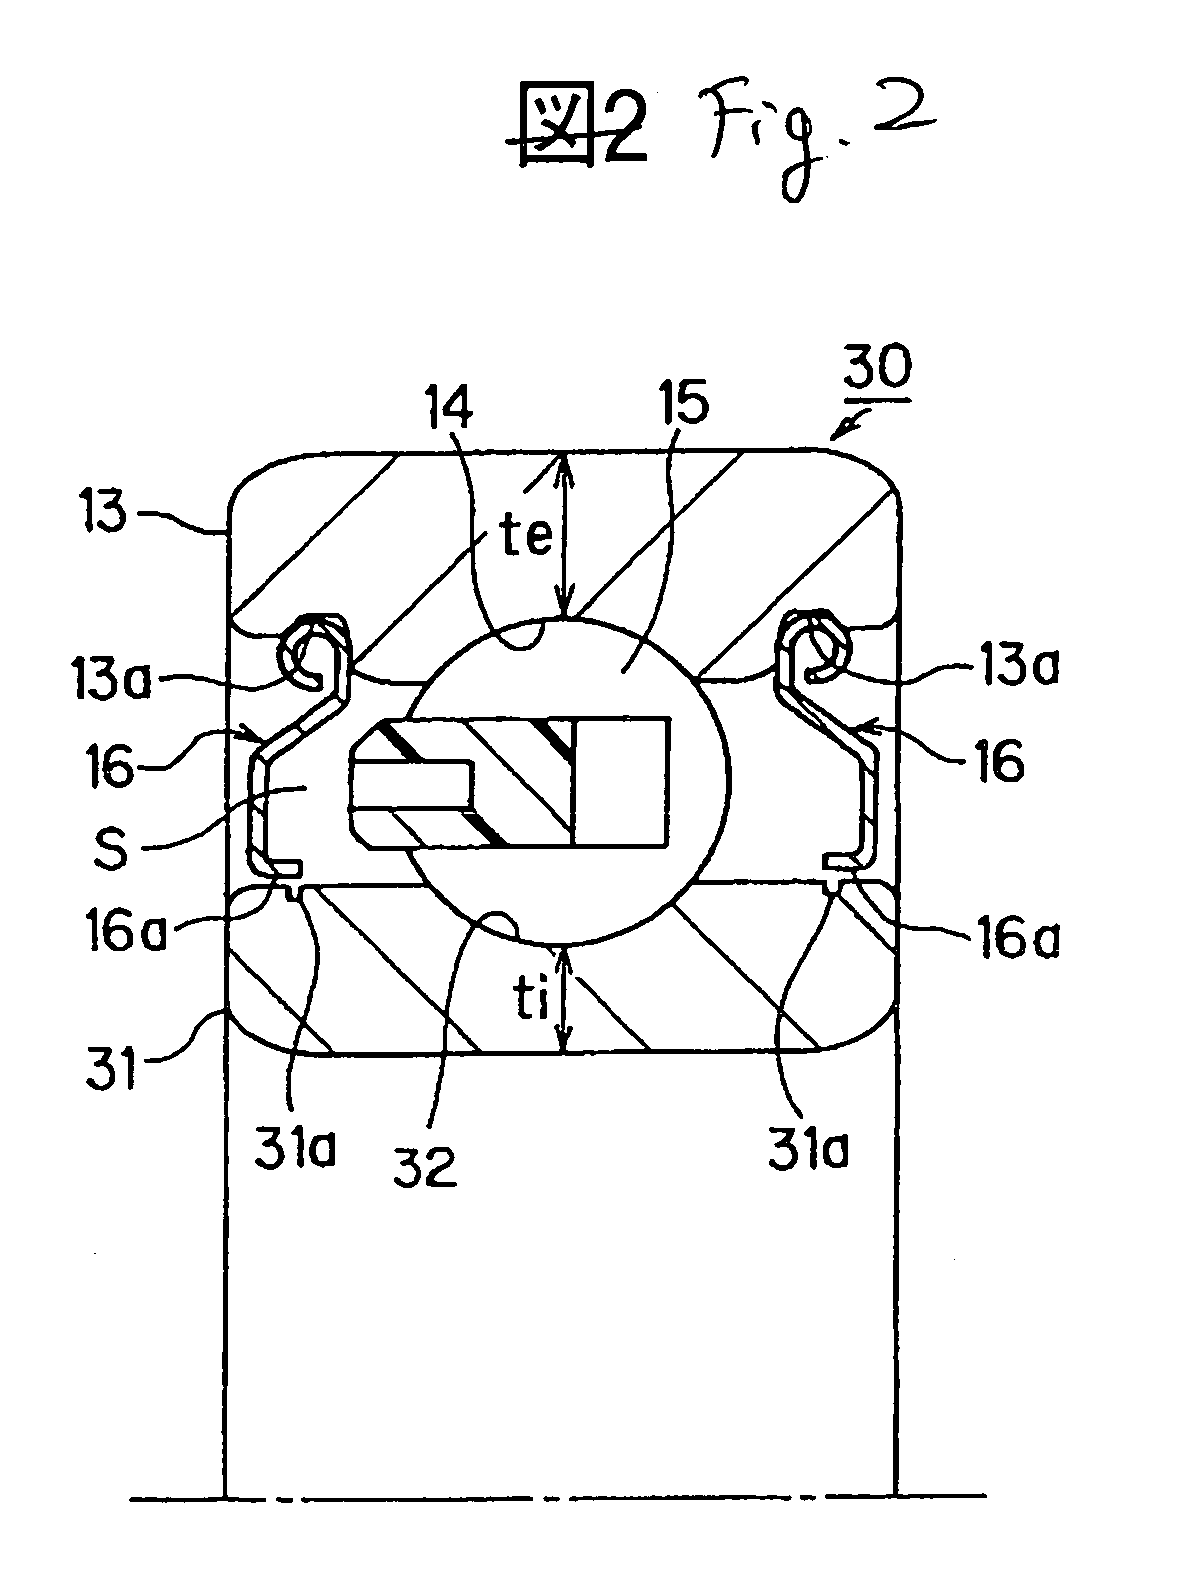 Rolling element bearing and motor